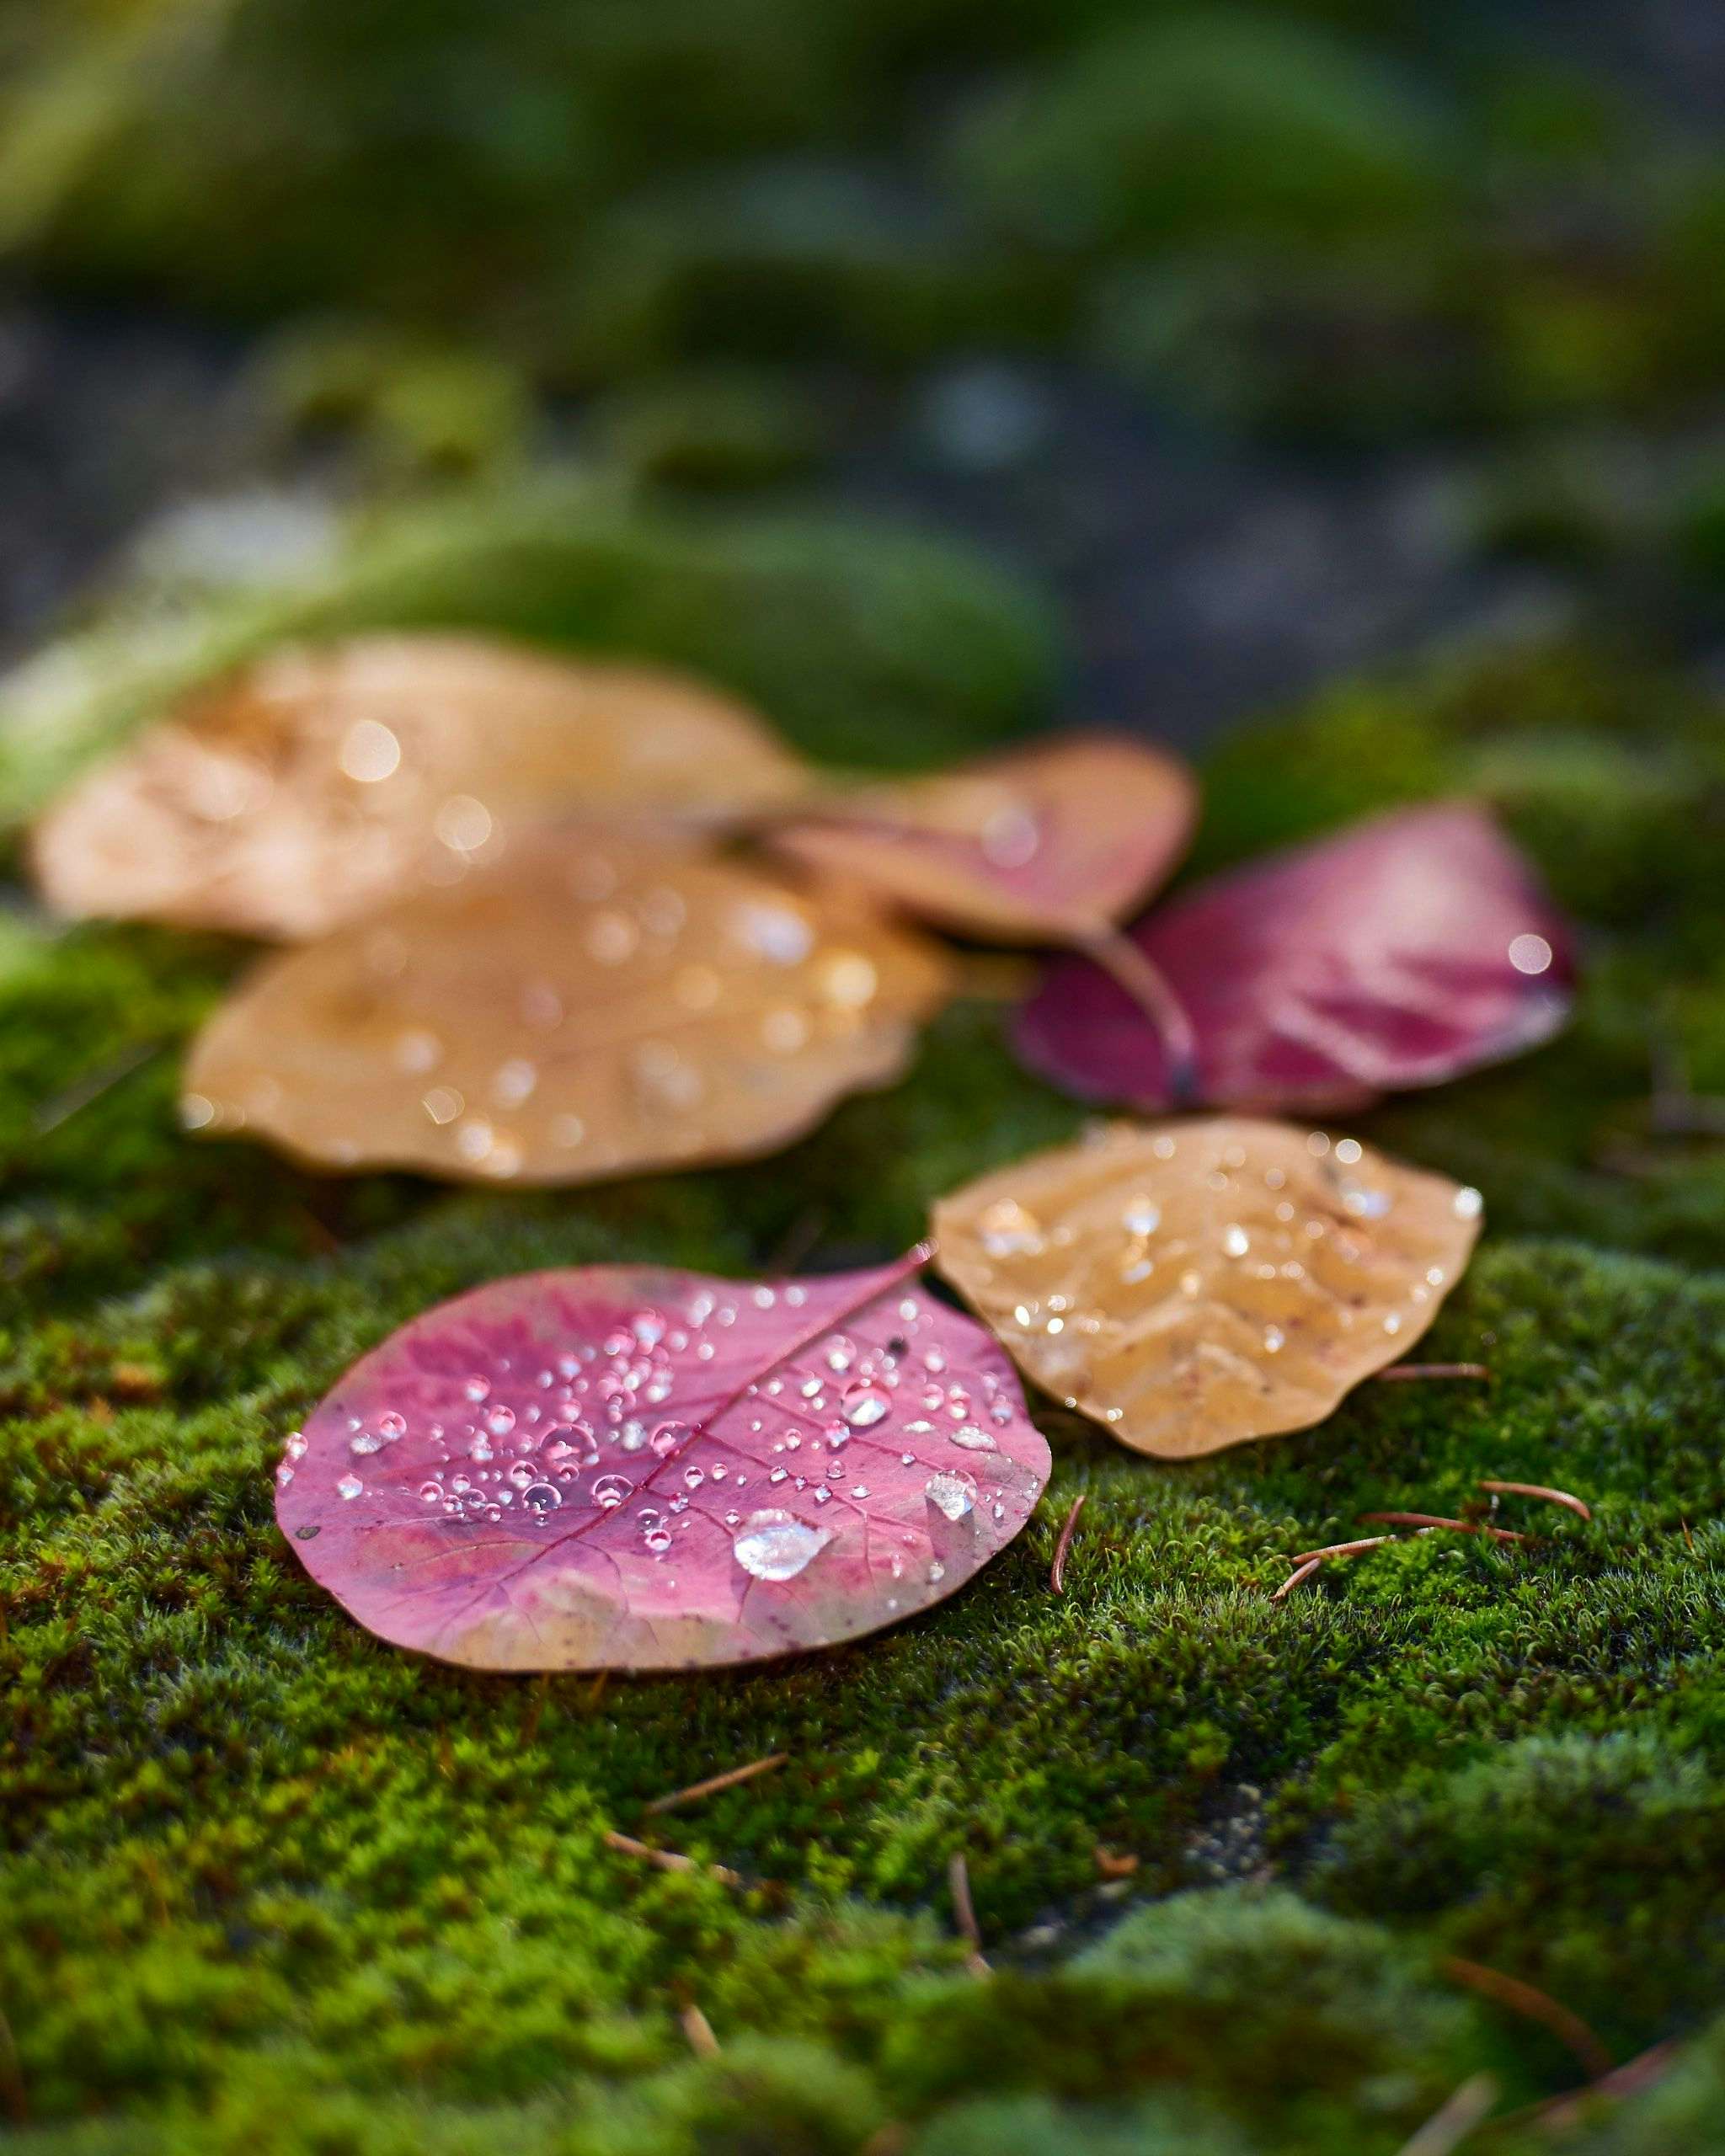 Autumn leaves on a bed of moss after the rain. Photography by Xavier Wendling.